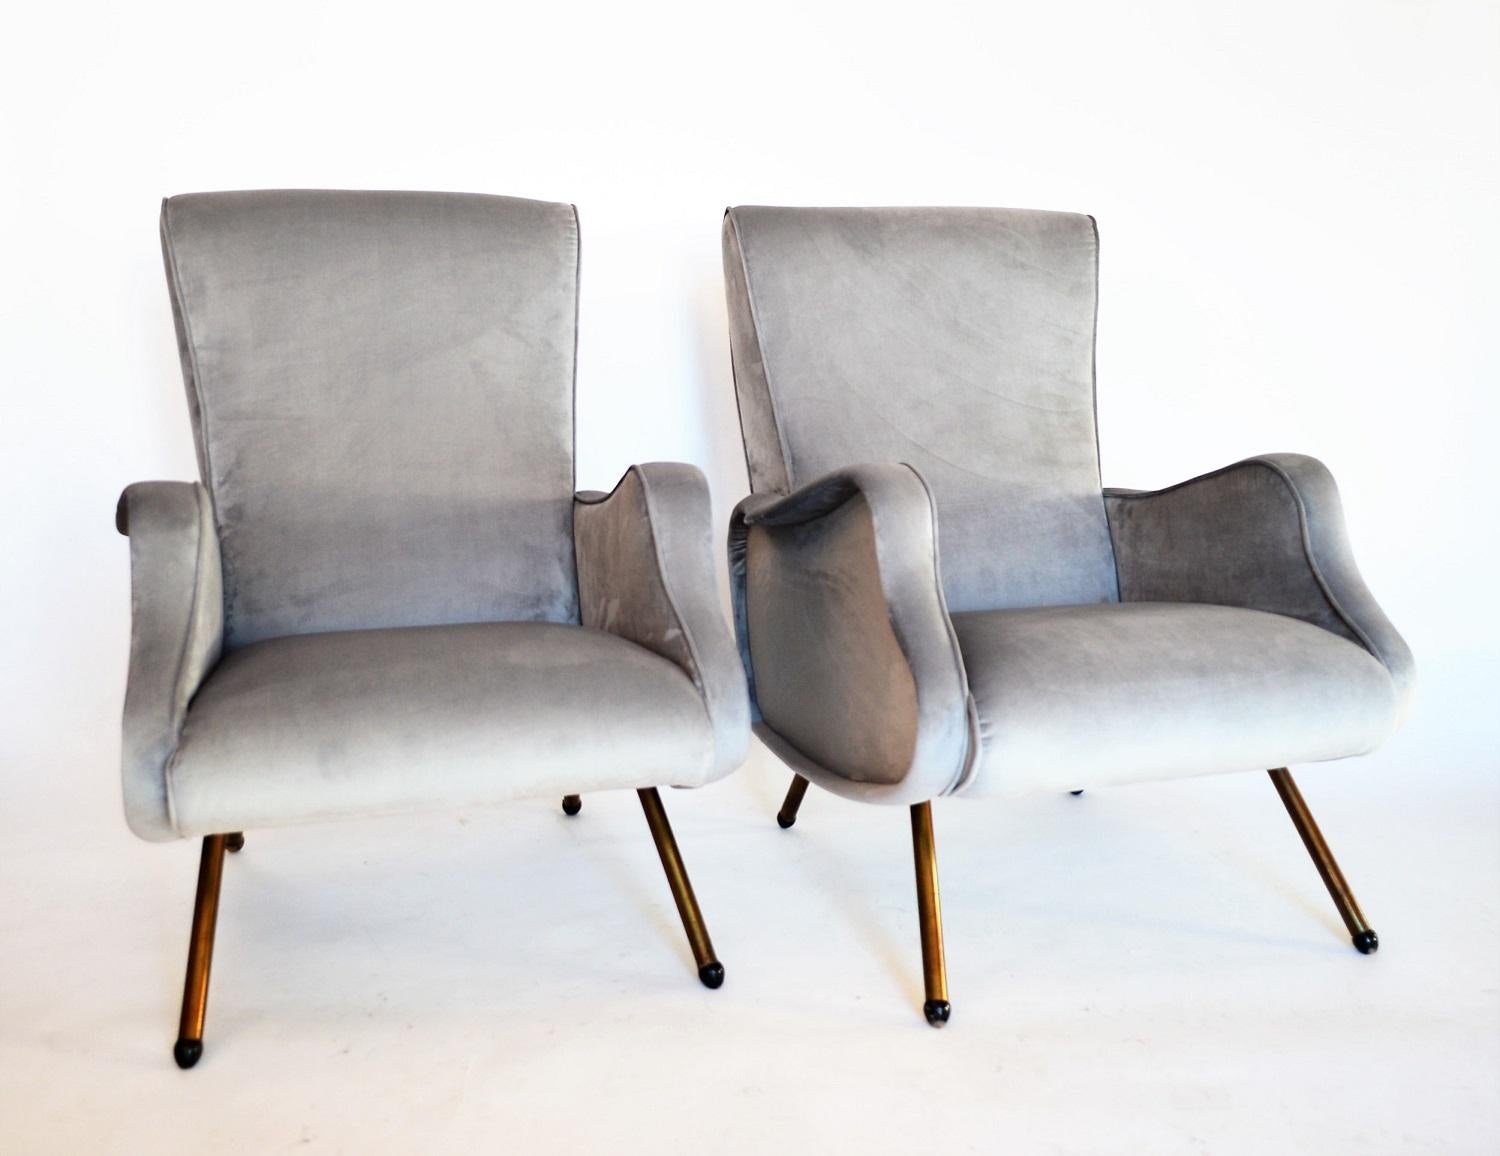 Mid-20th Century Italian Midcentury Armchairs Restored and Reupholstered in Grey Velvet, 1950s